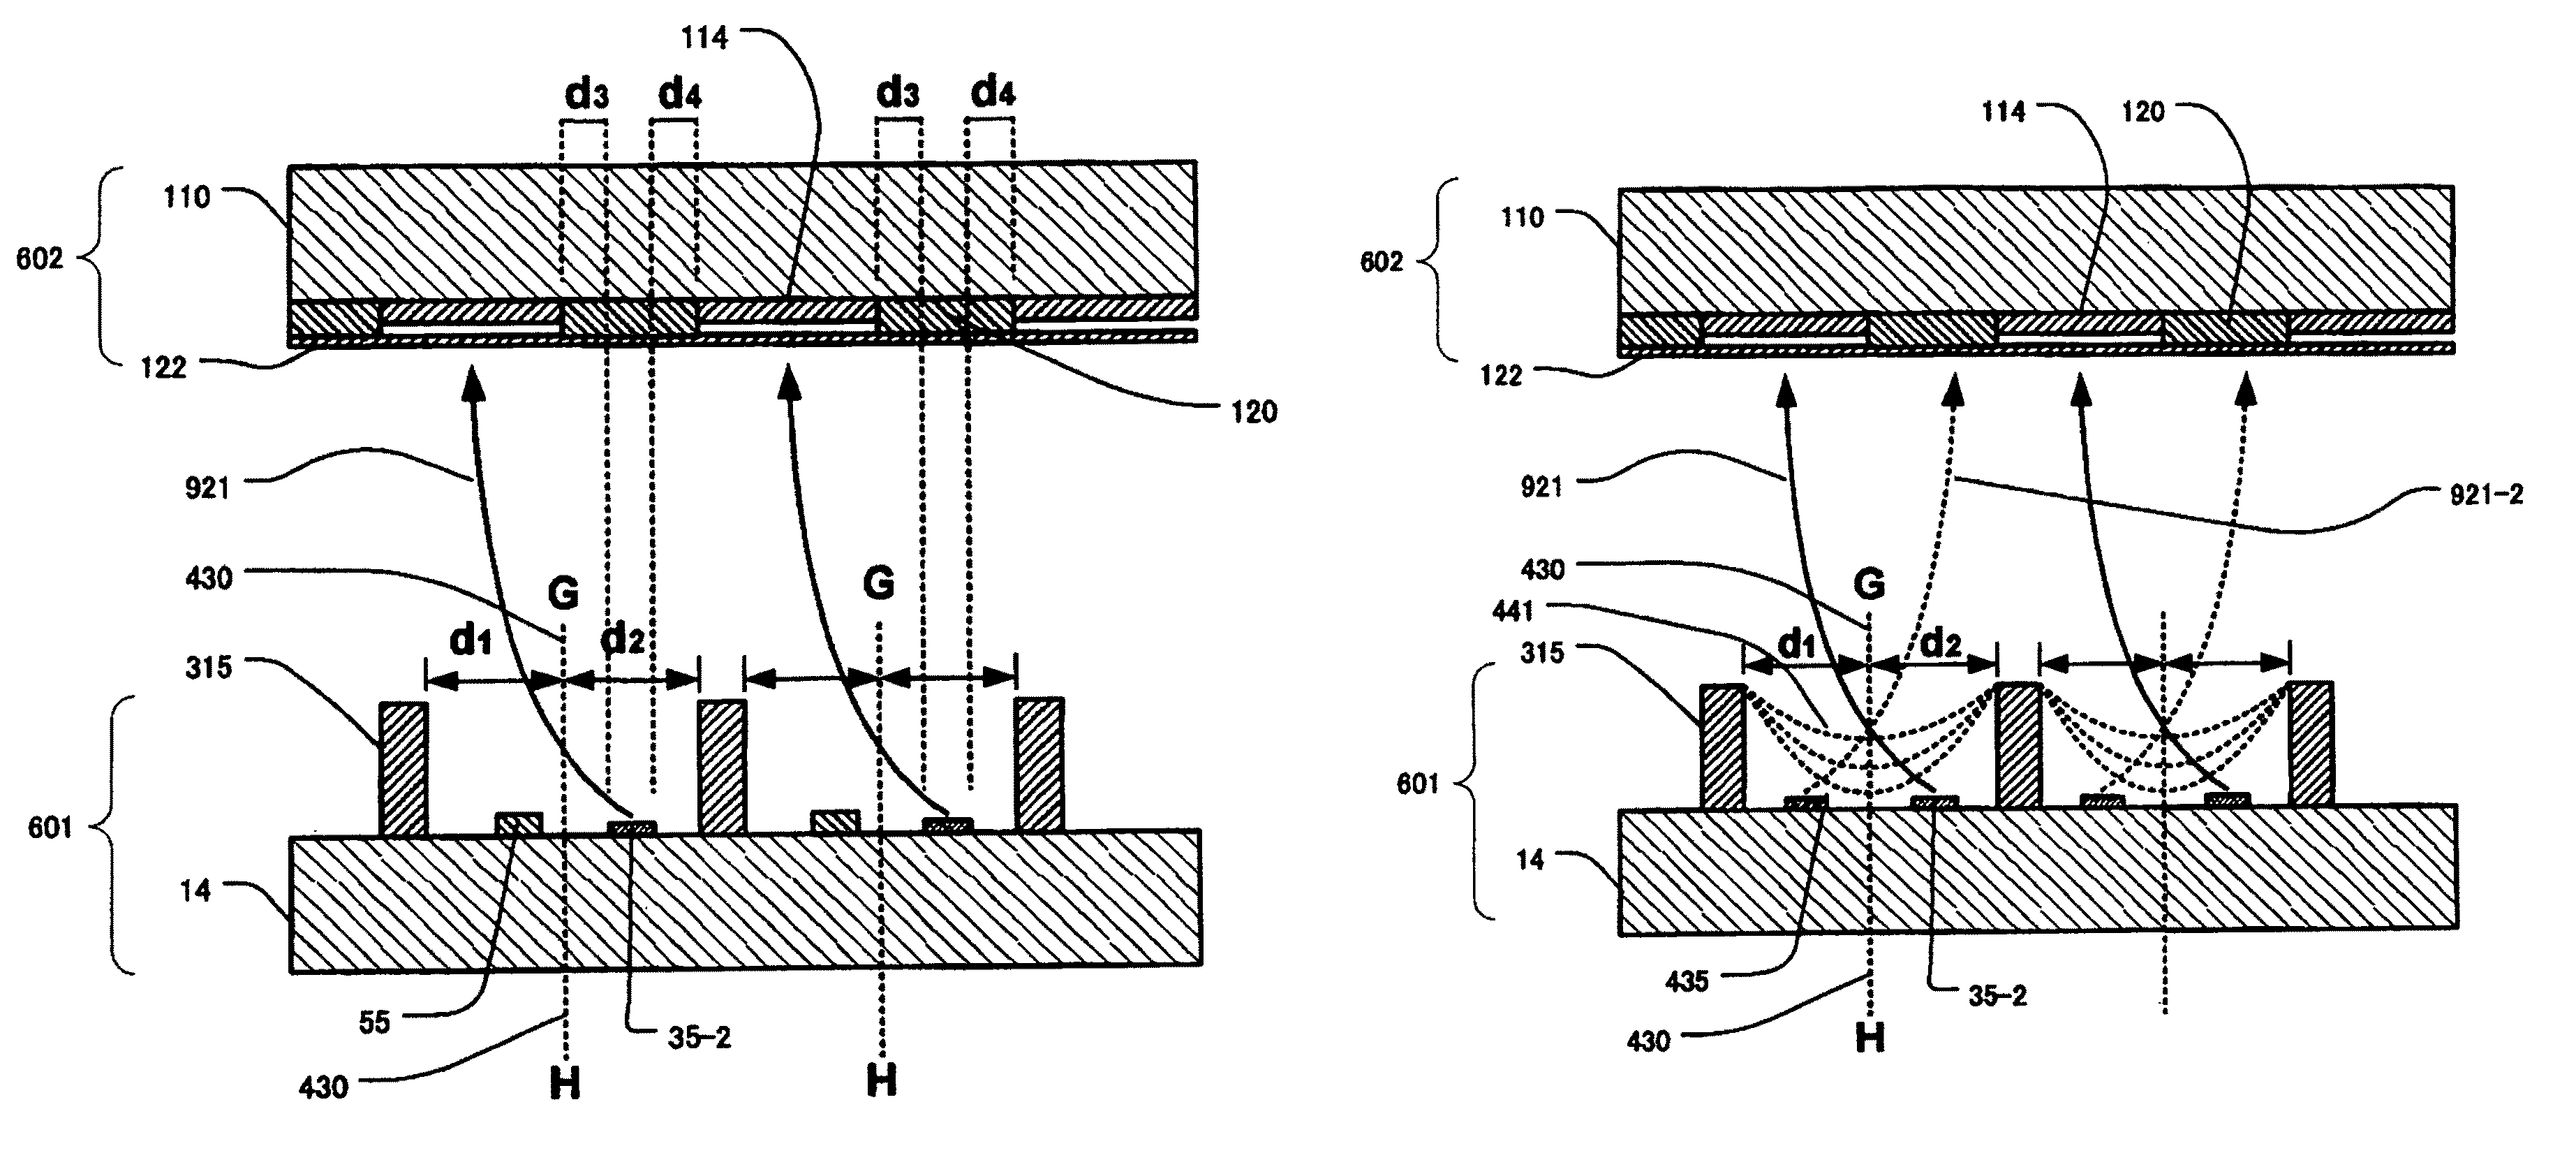 Image display apparatus with particular electron emission region location